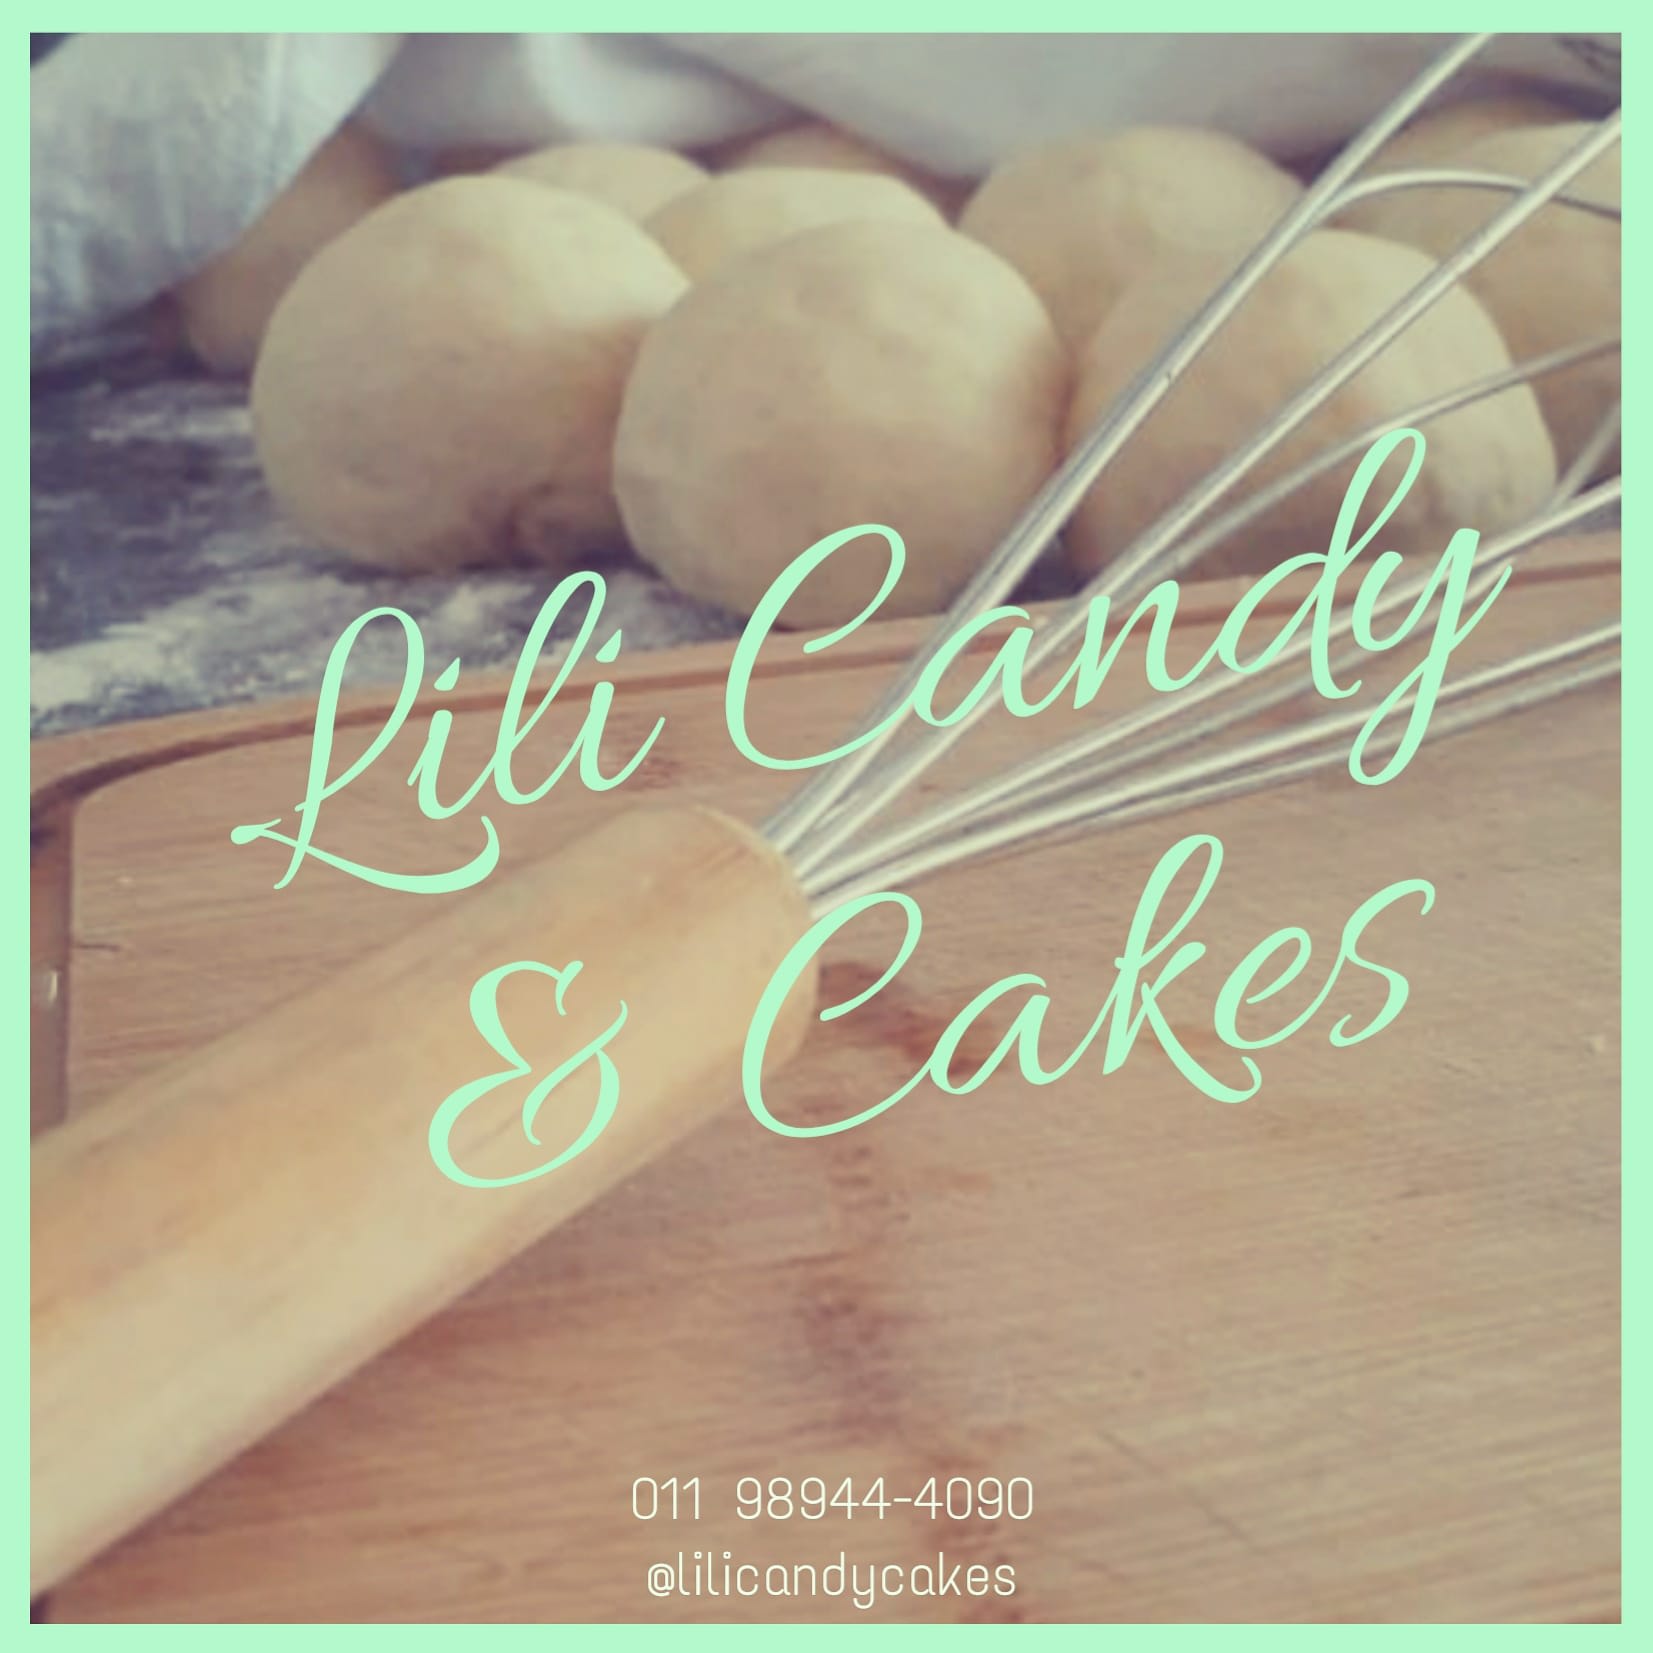 Lili Candy & Cakes